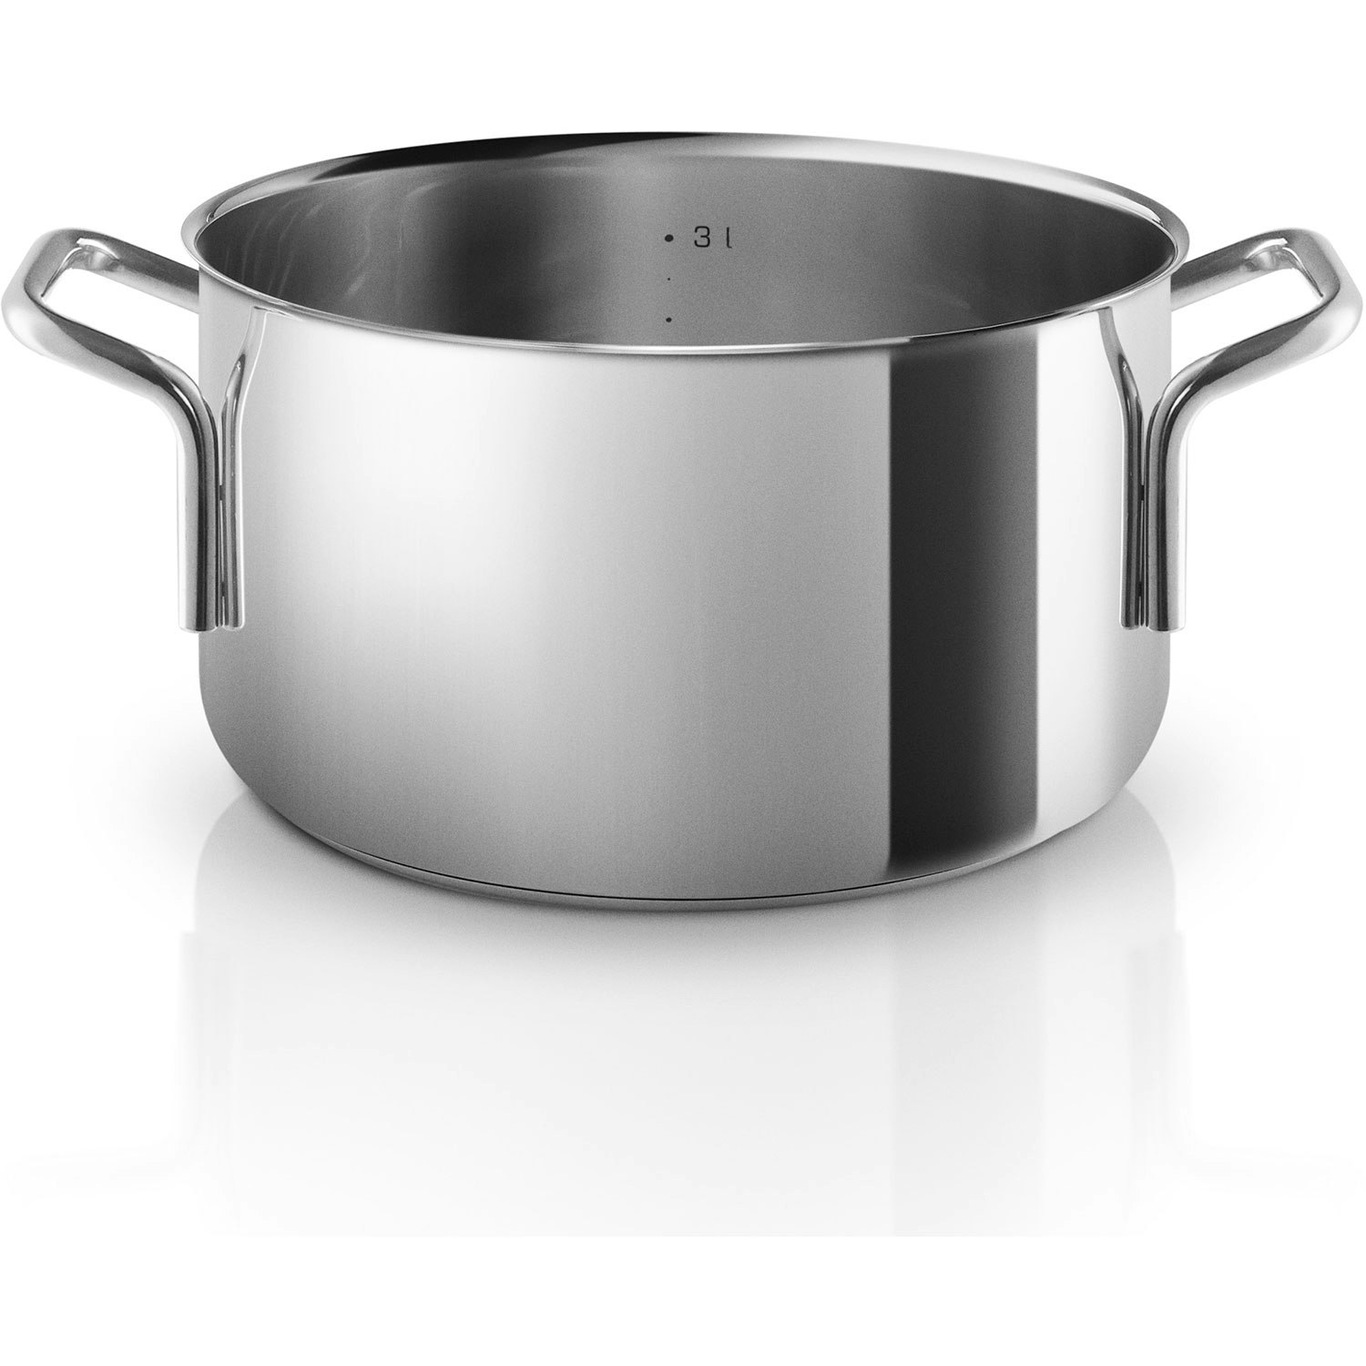 Pot stainless steel, 6,6 L